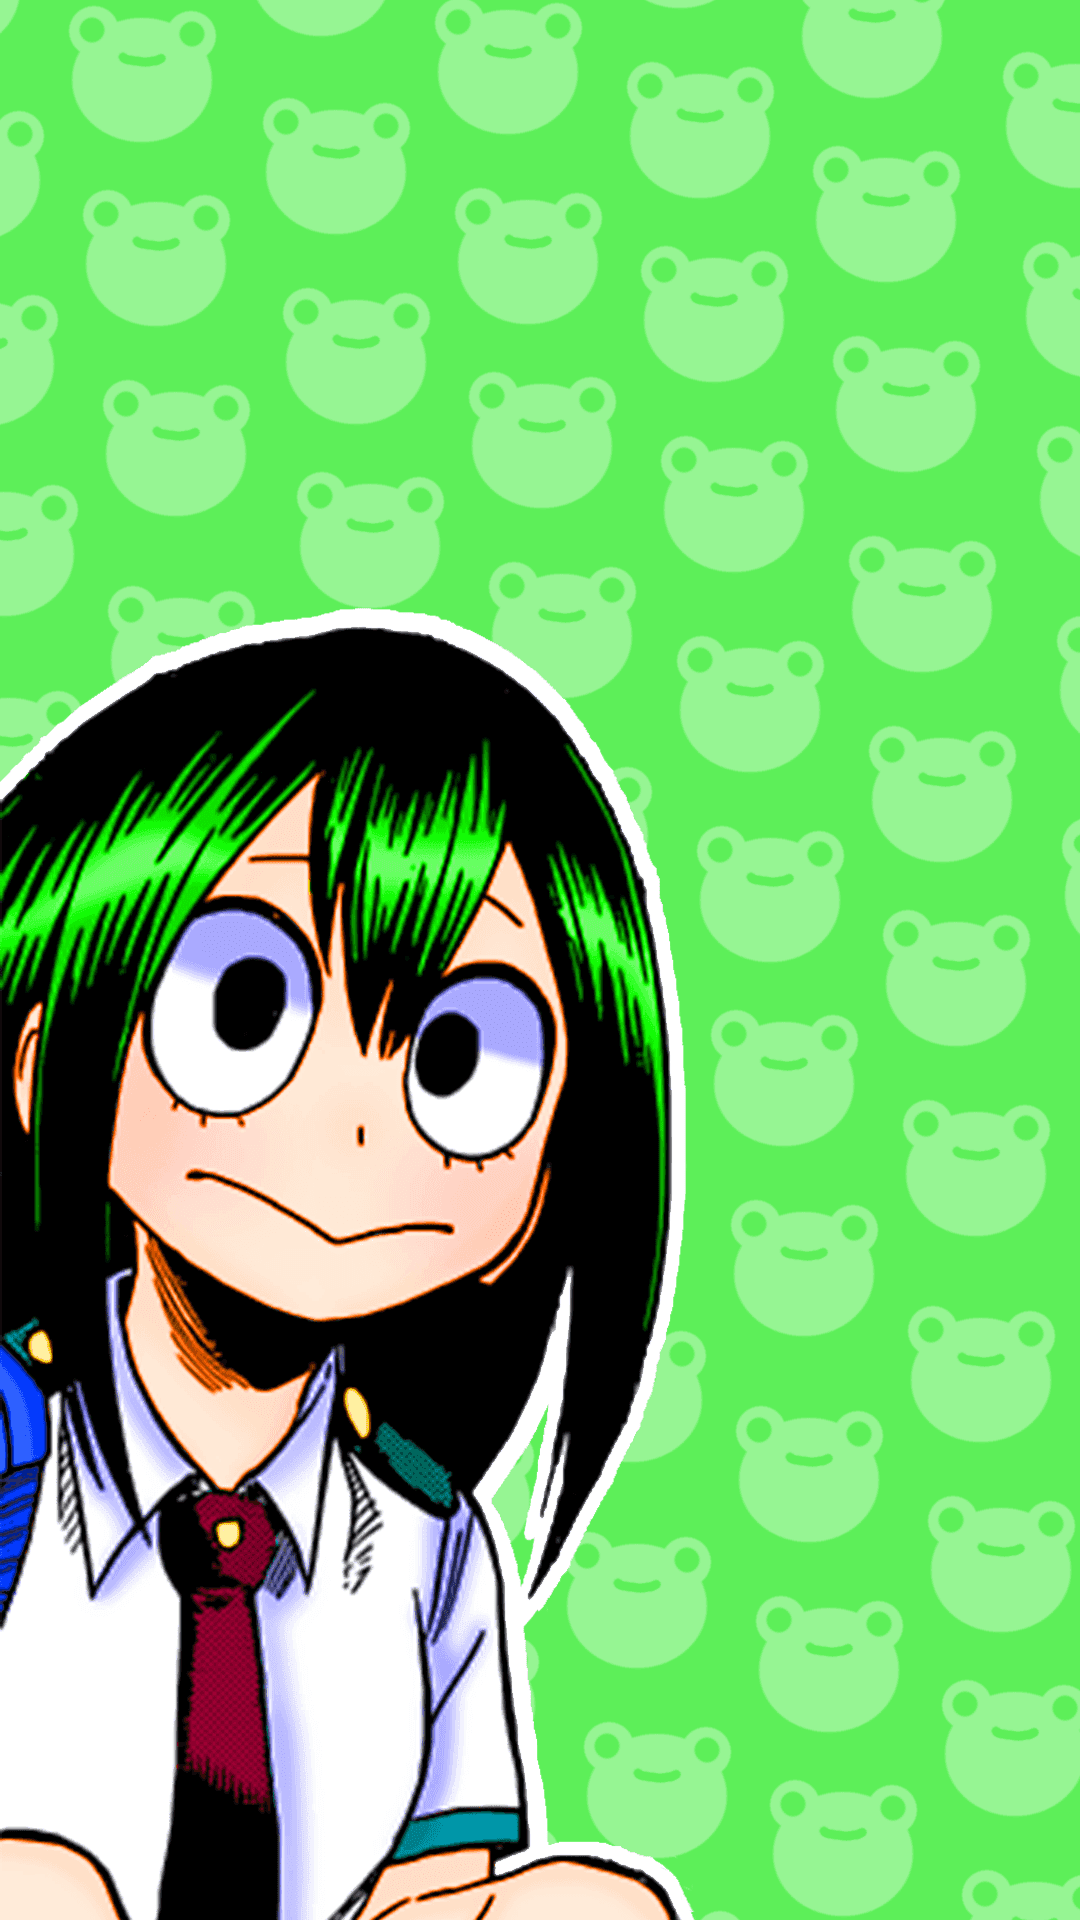 Download Feel the magic of Froppy's world. | Wallpapers.com